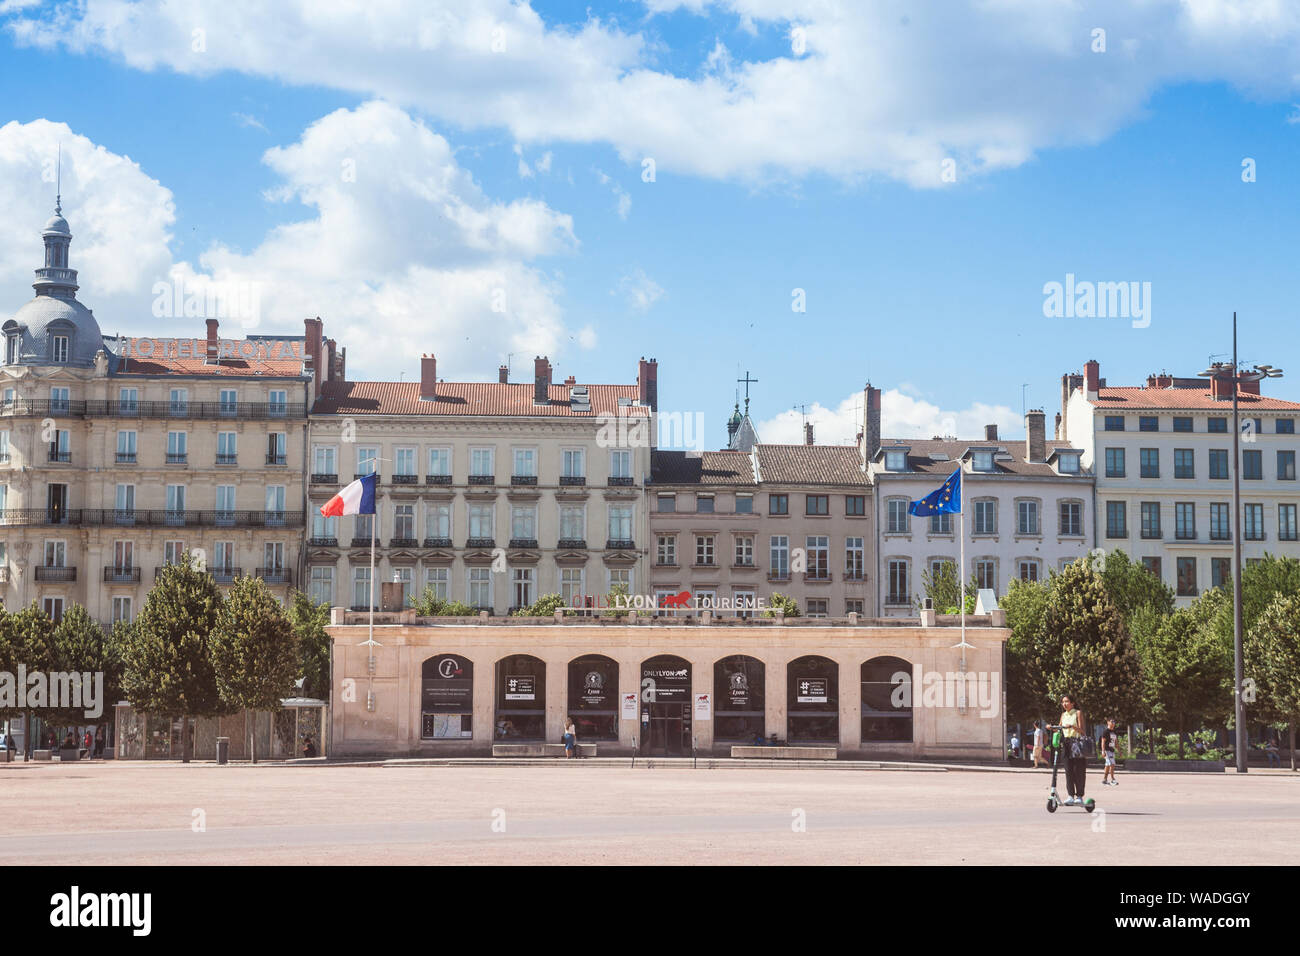 LYON, FRANCE - JULY 13, 2019: Only Lyon sign on the Tourism office of  Bellecour Square in the afternoon It is the visual branding identity used  for to Stock Photo - Alamy